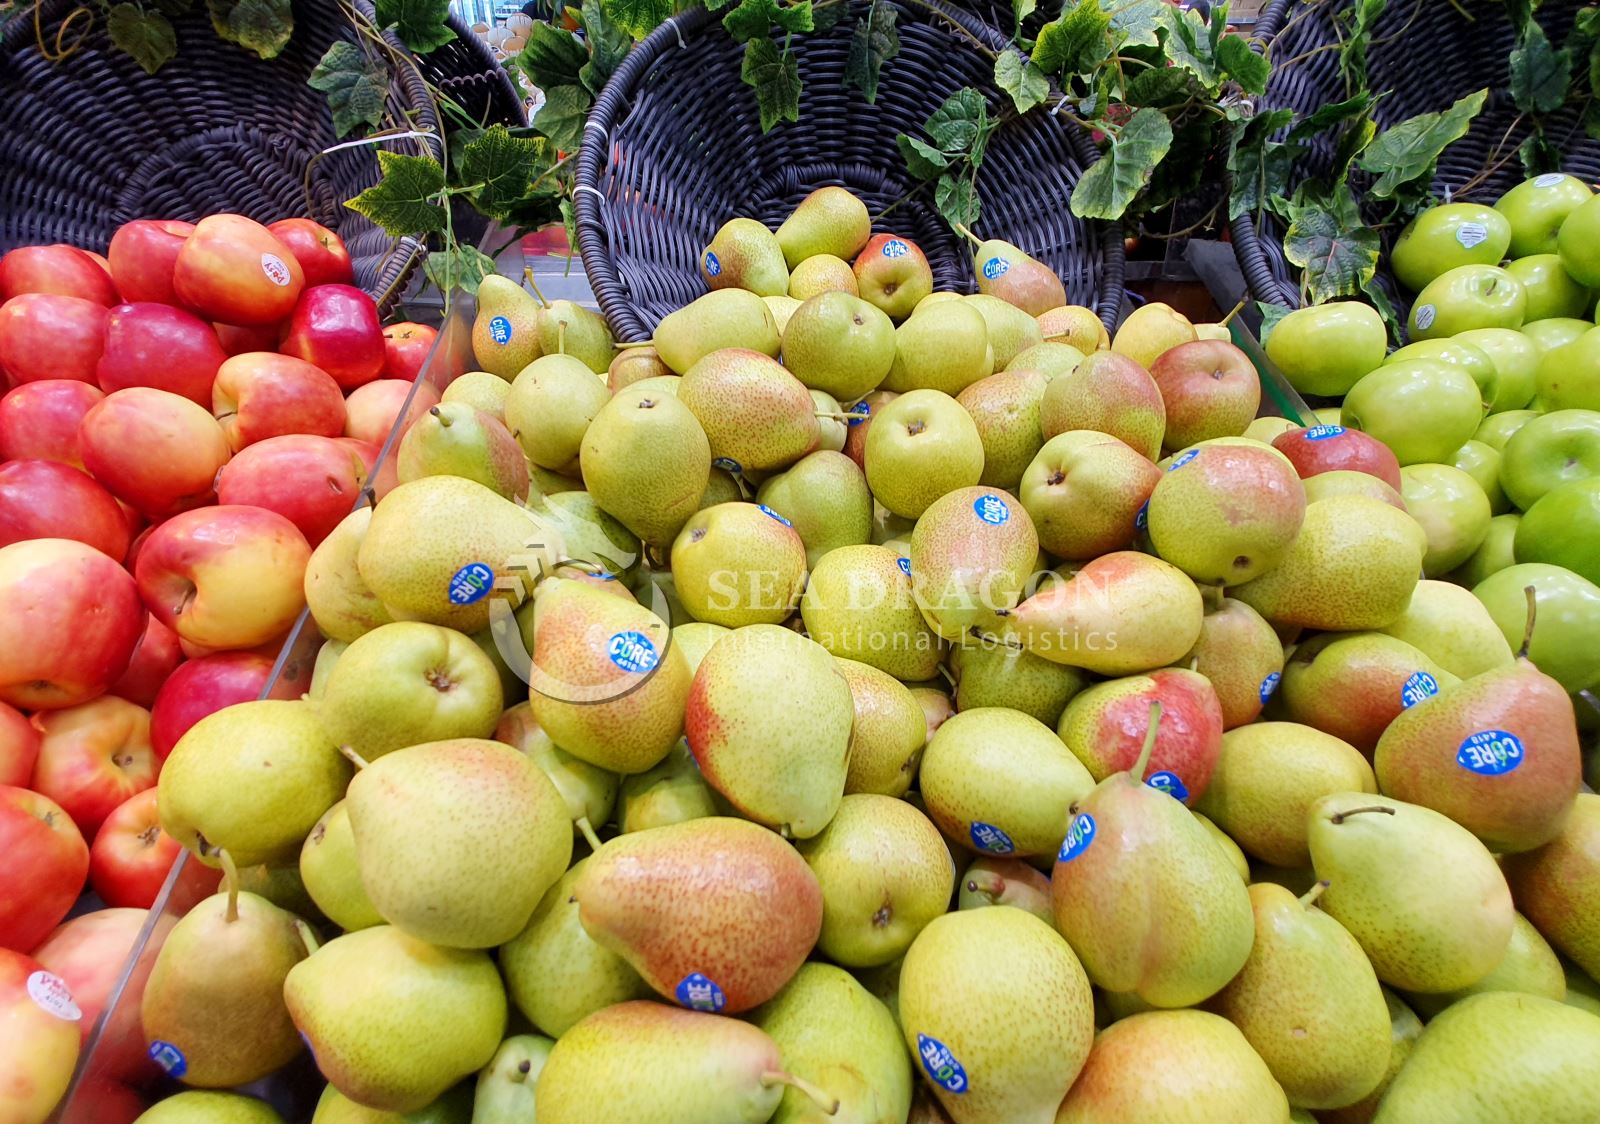 PROCESS OF IMPORTING FOREIGN FRUITS TO VIETNAM